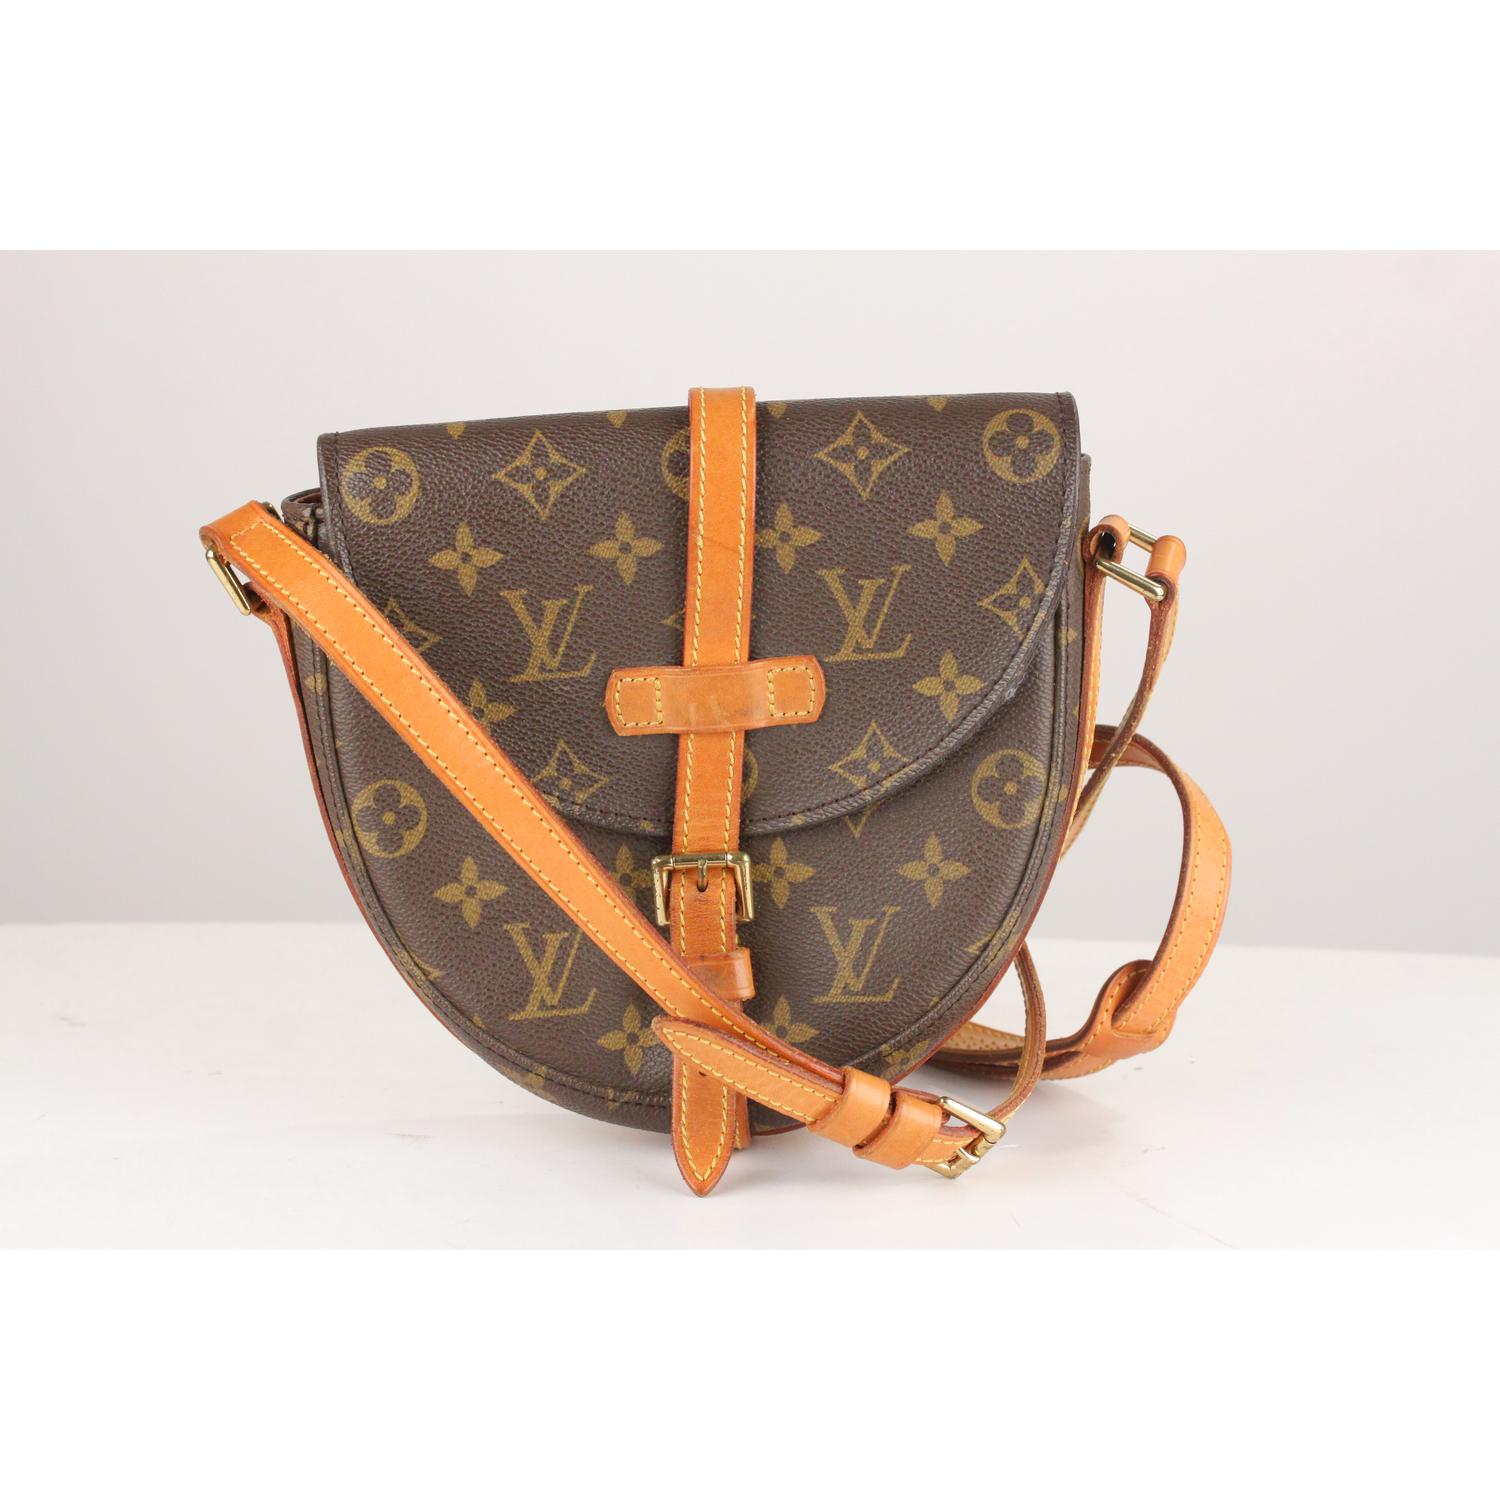 Brown monogram canvas 'Chantilly'crossbody bag from Louis Vuitton. Featuring a rounded shape and has a versatile adjustable shoulder strap that can be worn on the shoulder or cross-body for hands-free convenience. Foldover top, a buckle fastening